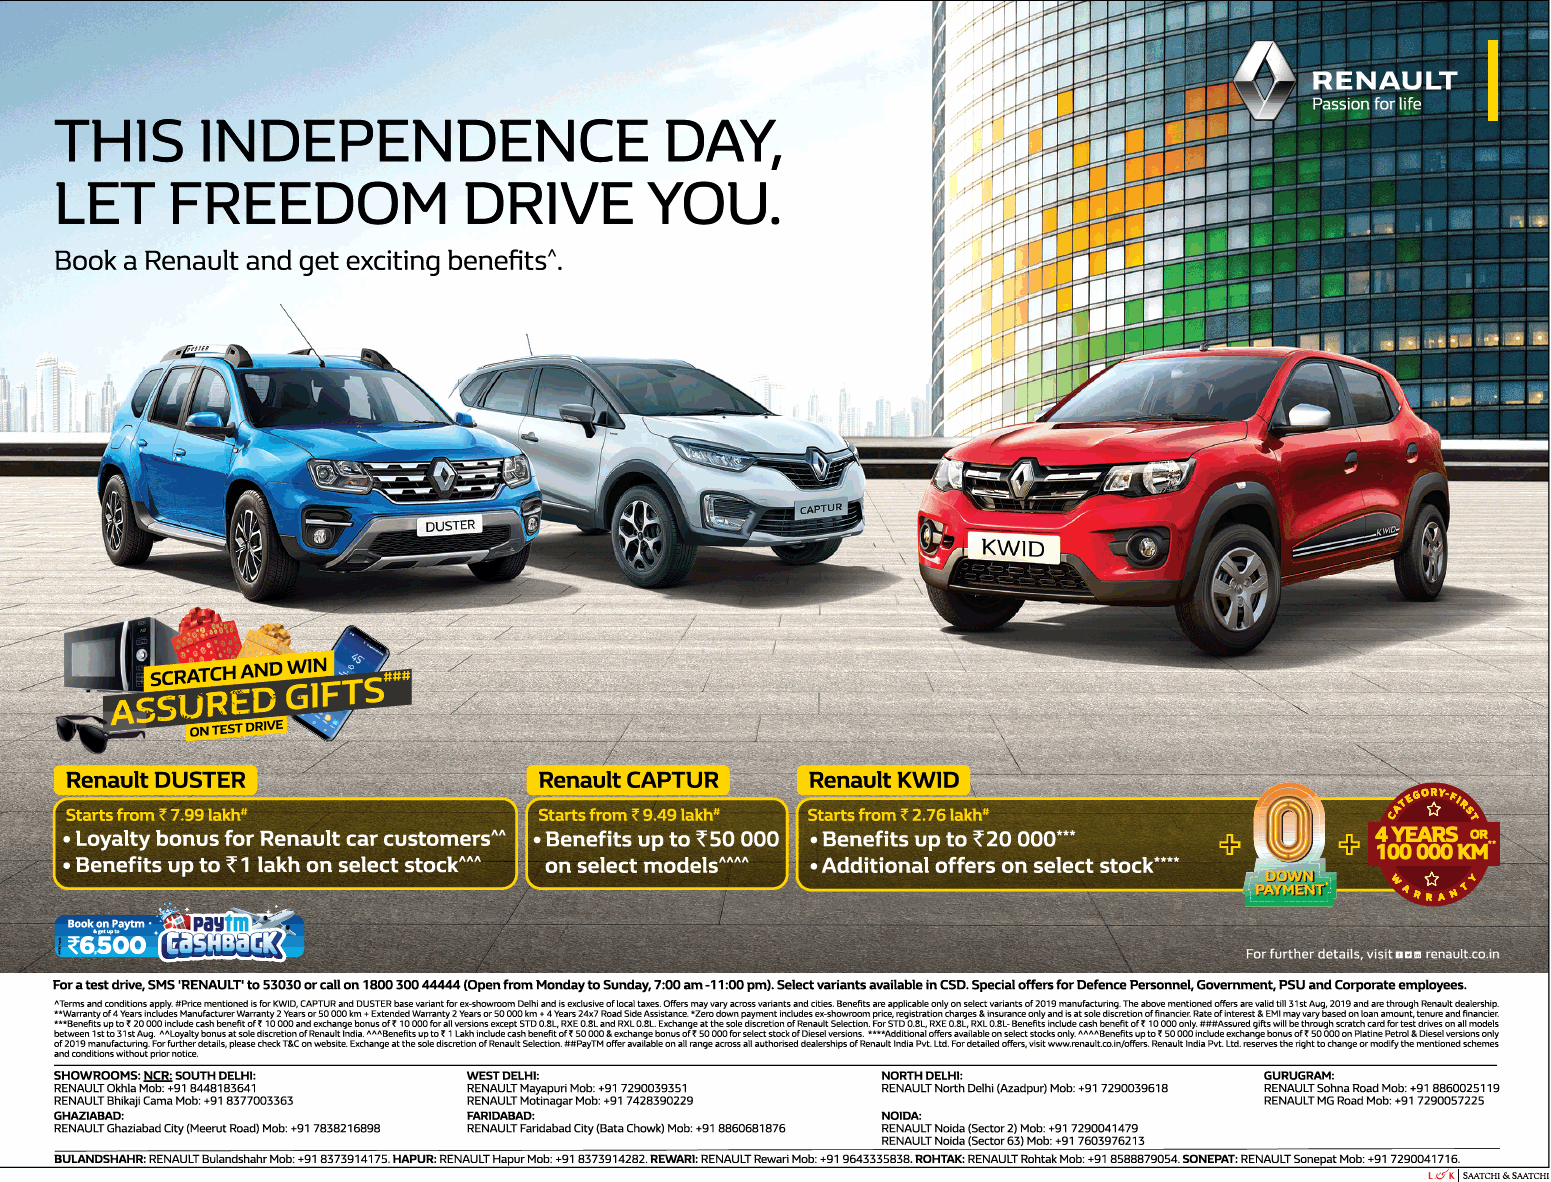 renault-cars-this-independence-day-let-freedom-drive-you-ad-delhi-times-14-08-2019.png